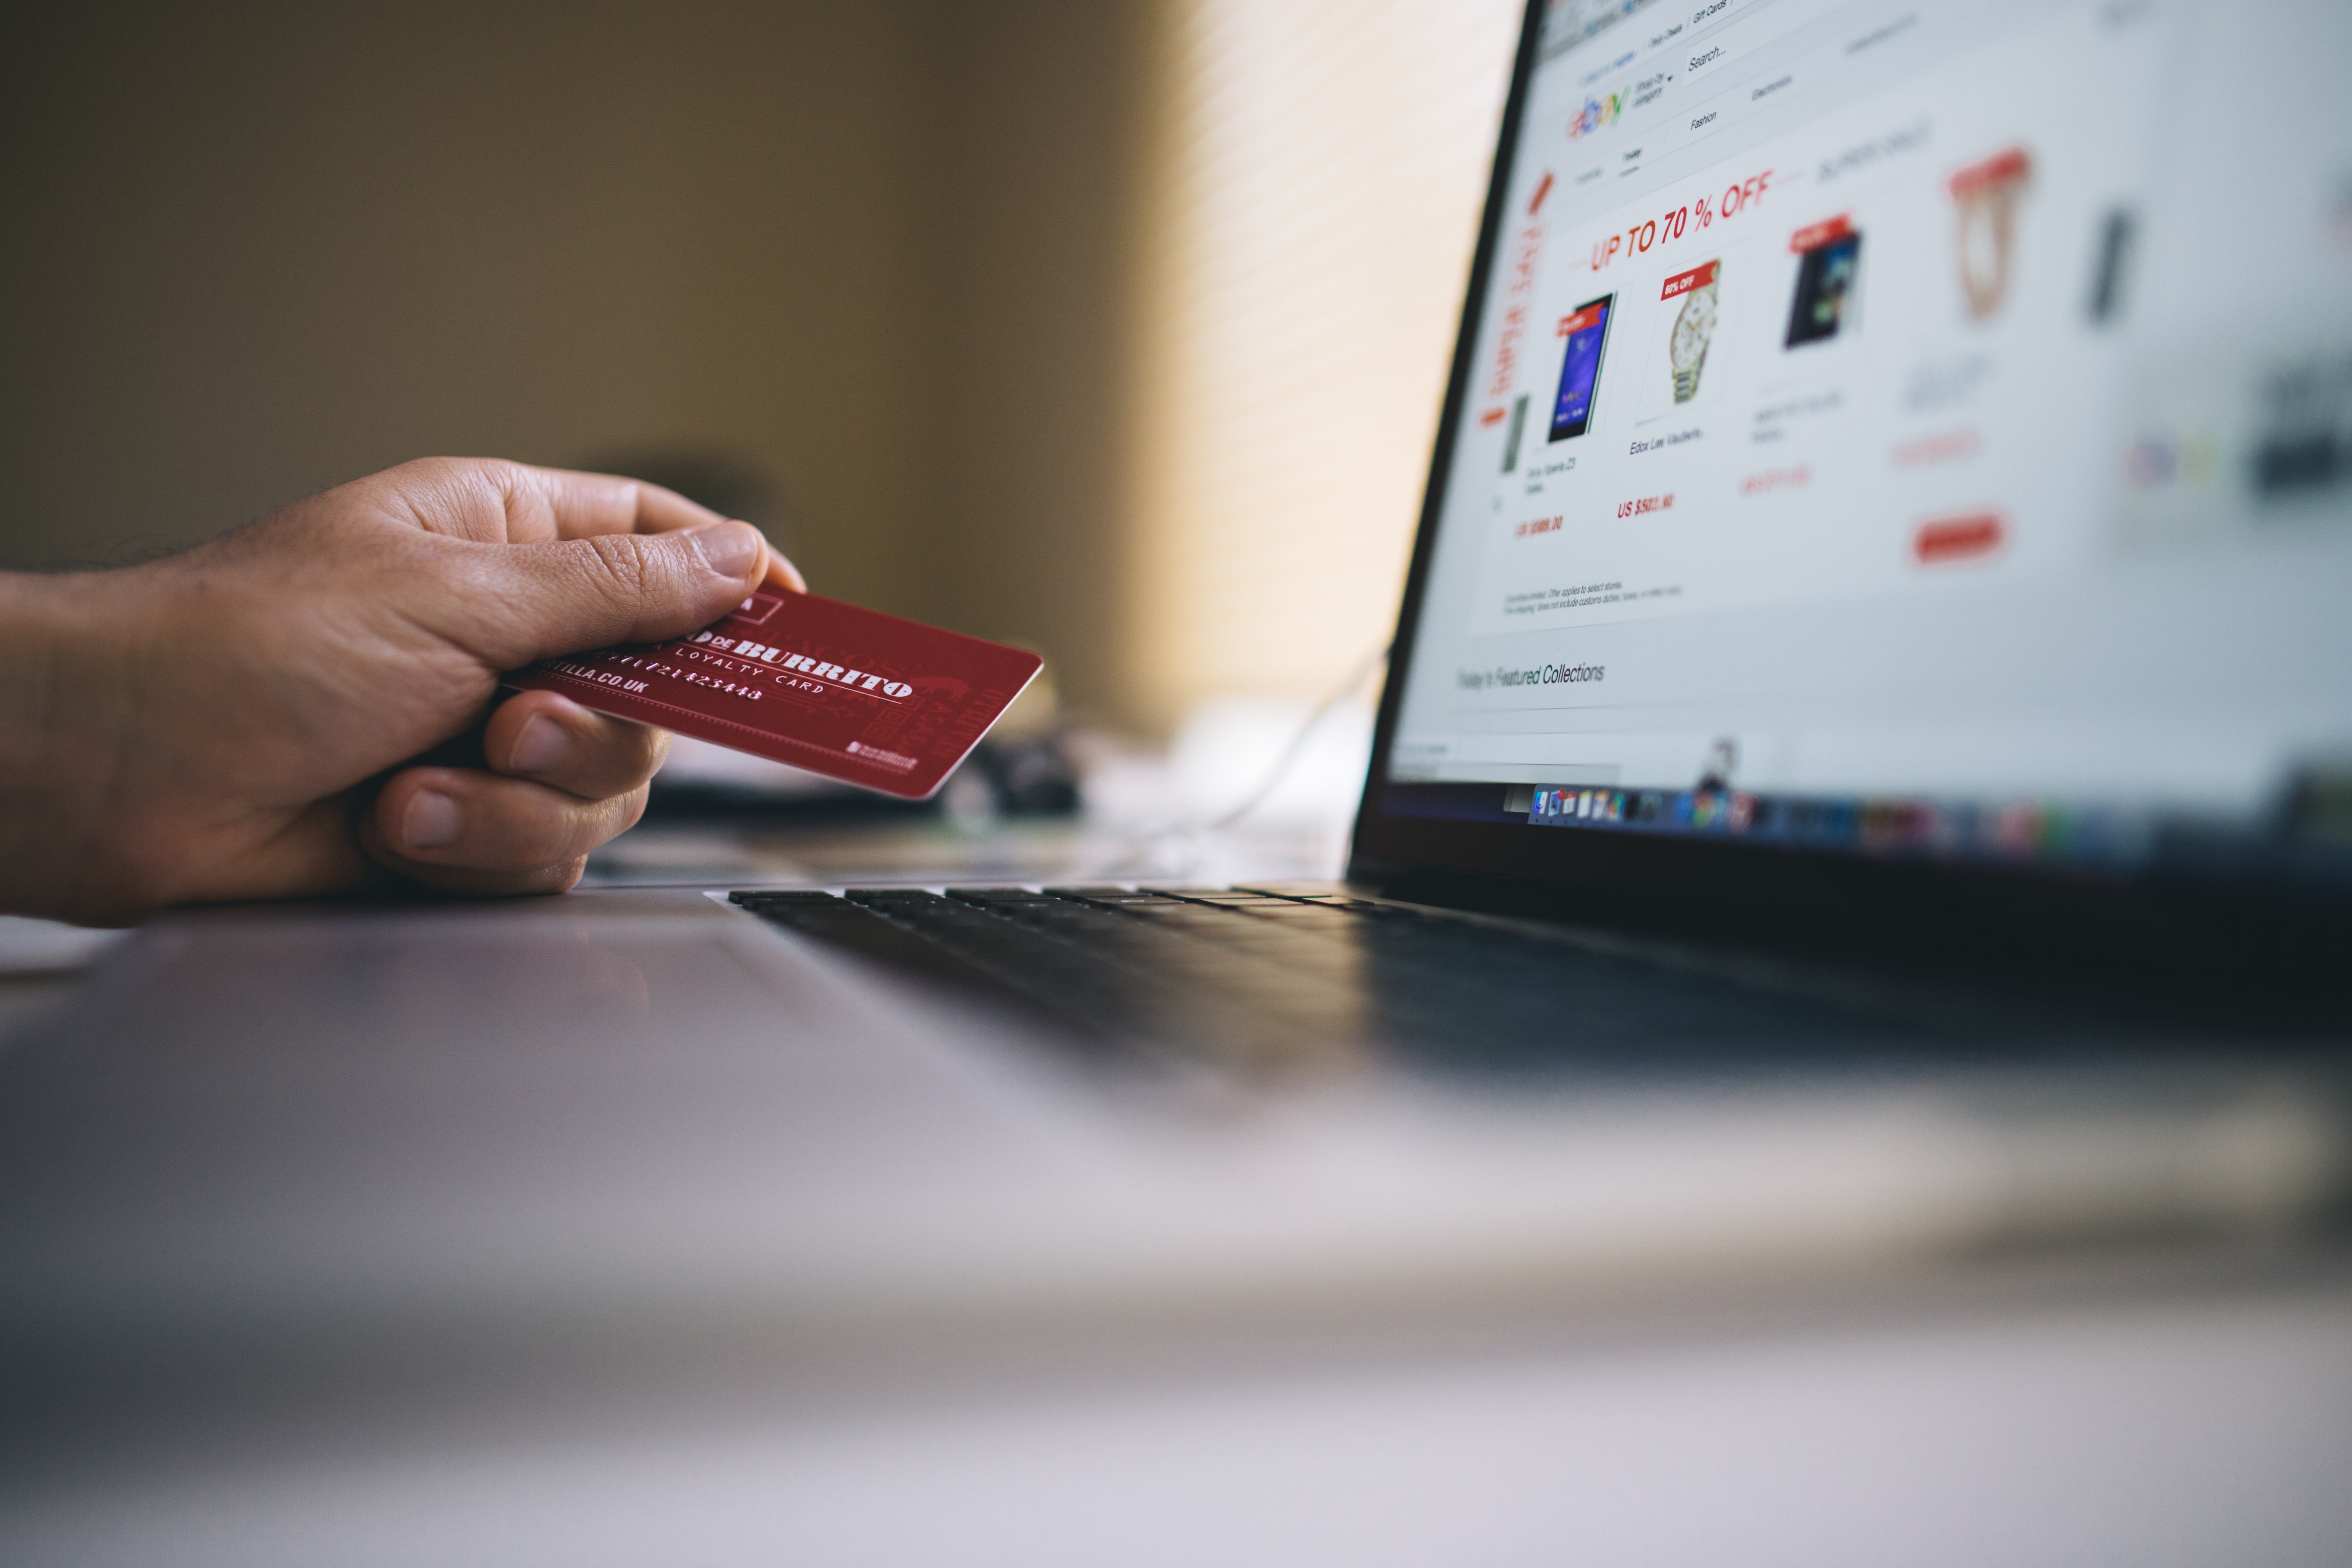 Top 5 eCommerce trends you cannot ignore